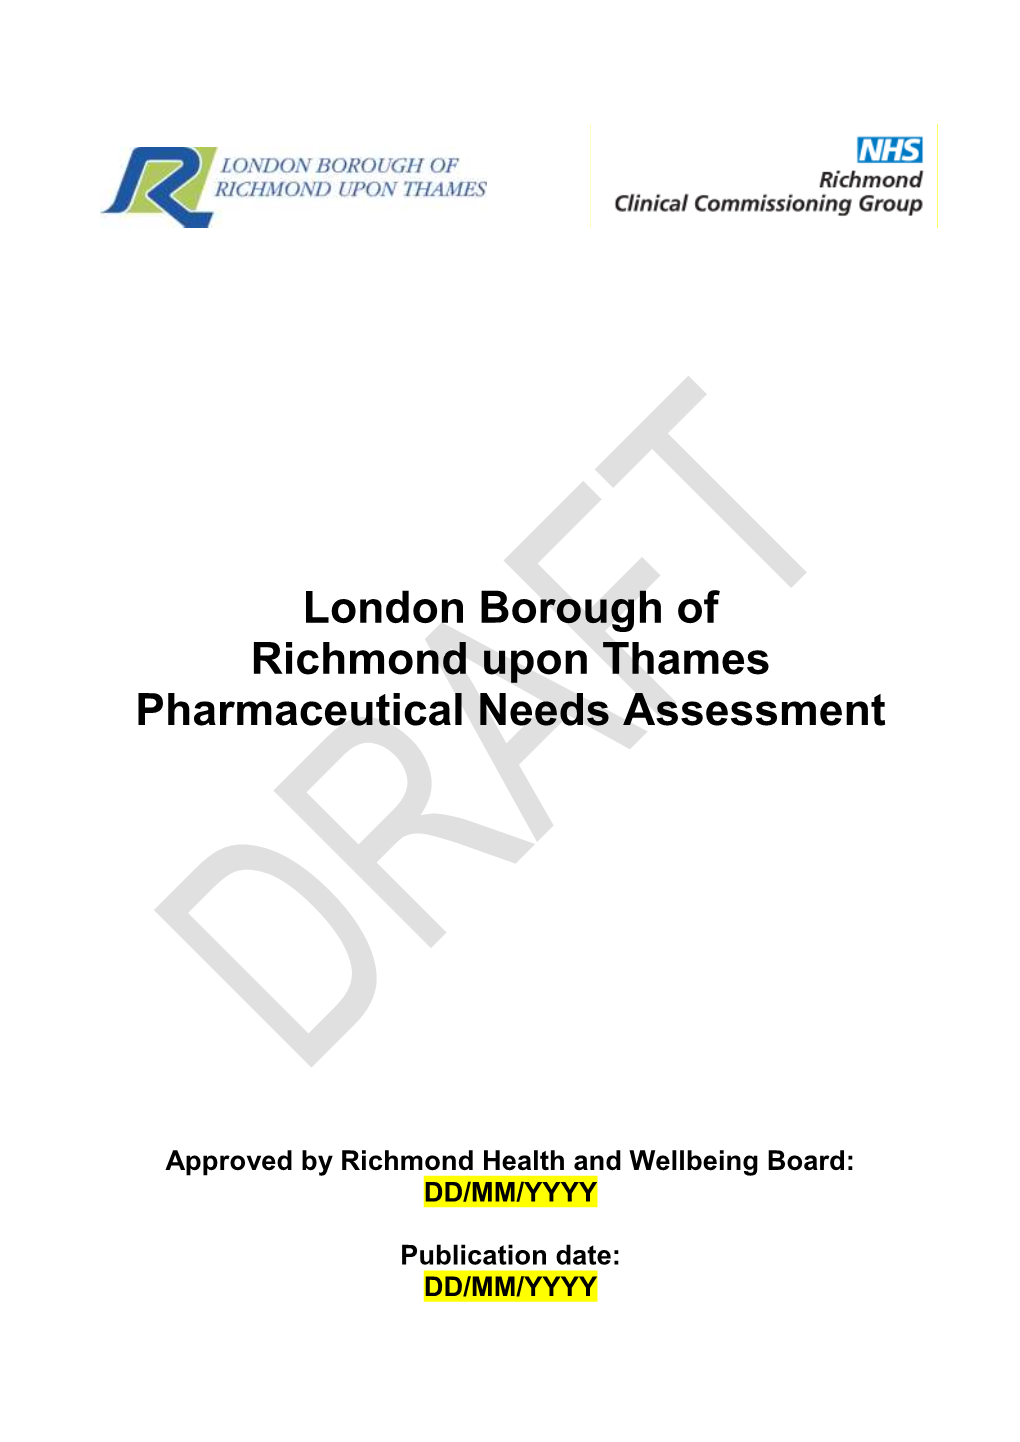 London Borough of Richmond Upon Thames Pharmaceutical Needs Assessment